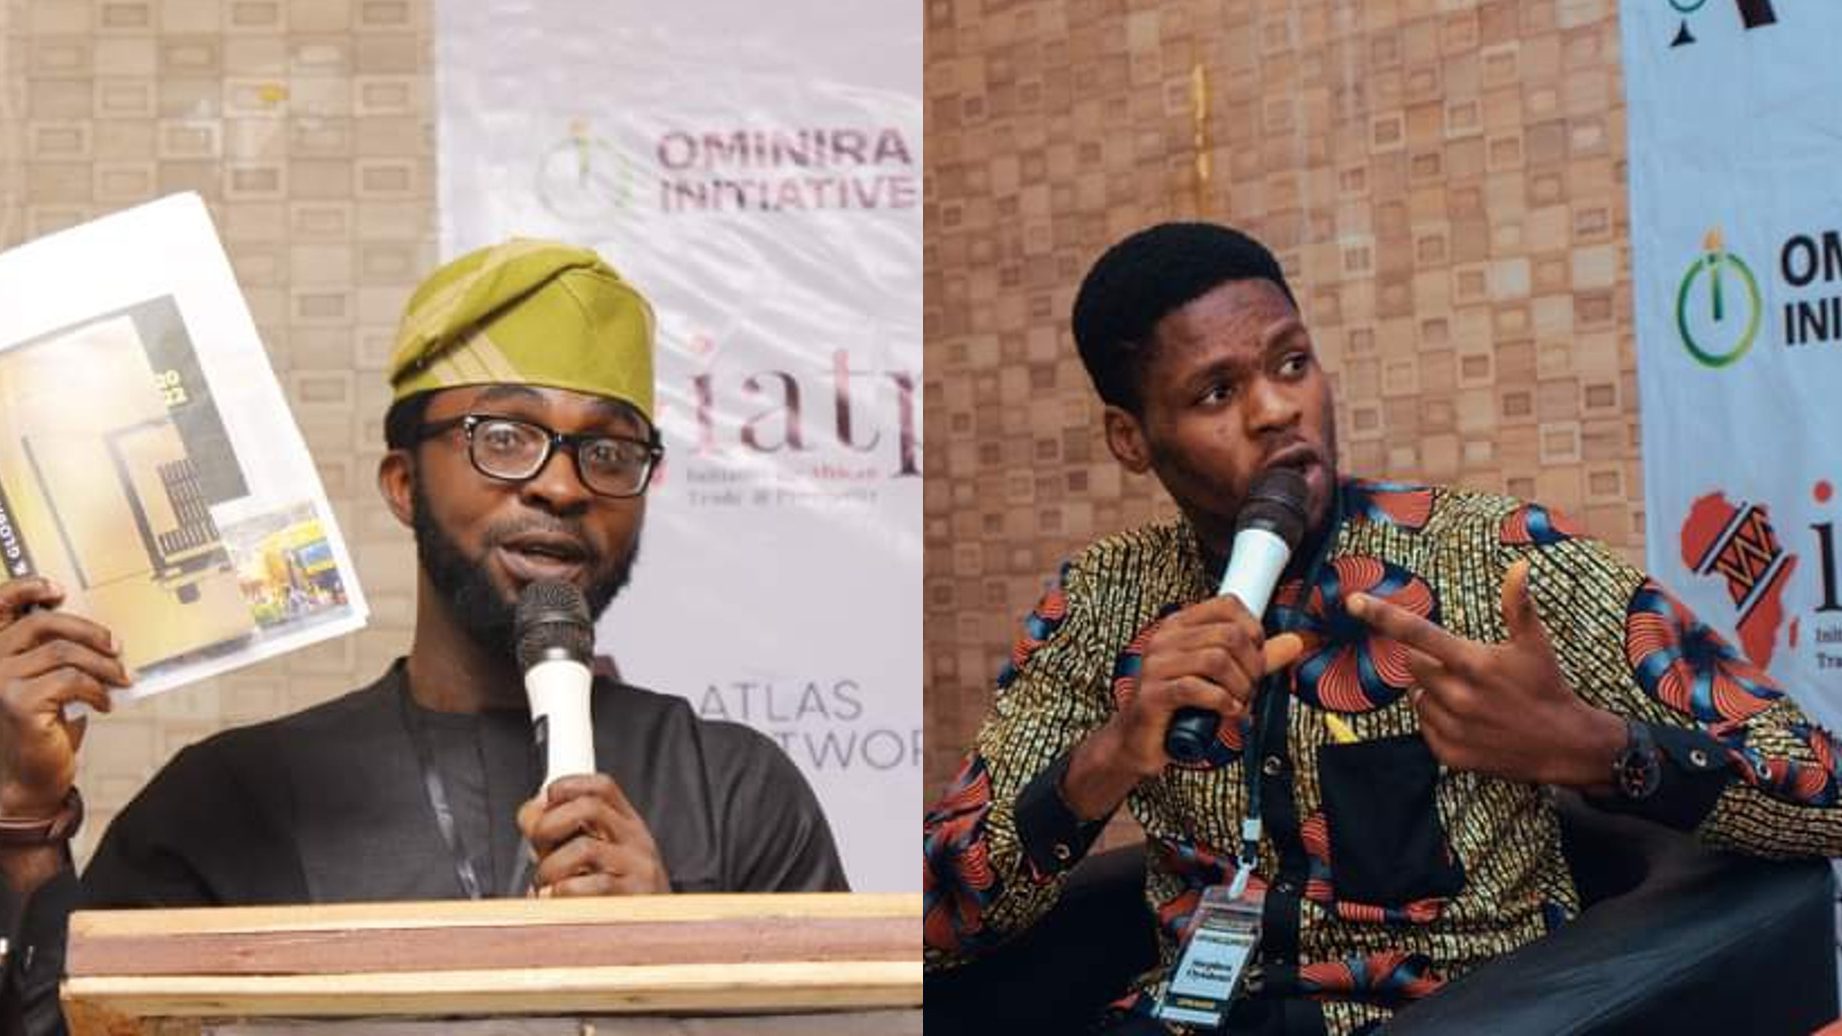 The inaugural Freedom in Nigeria Conference was organized by SFL alumni Lanre Peter and Stephen Oyedemi through their organization, Ominira Initiative